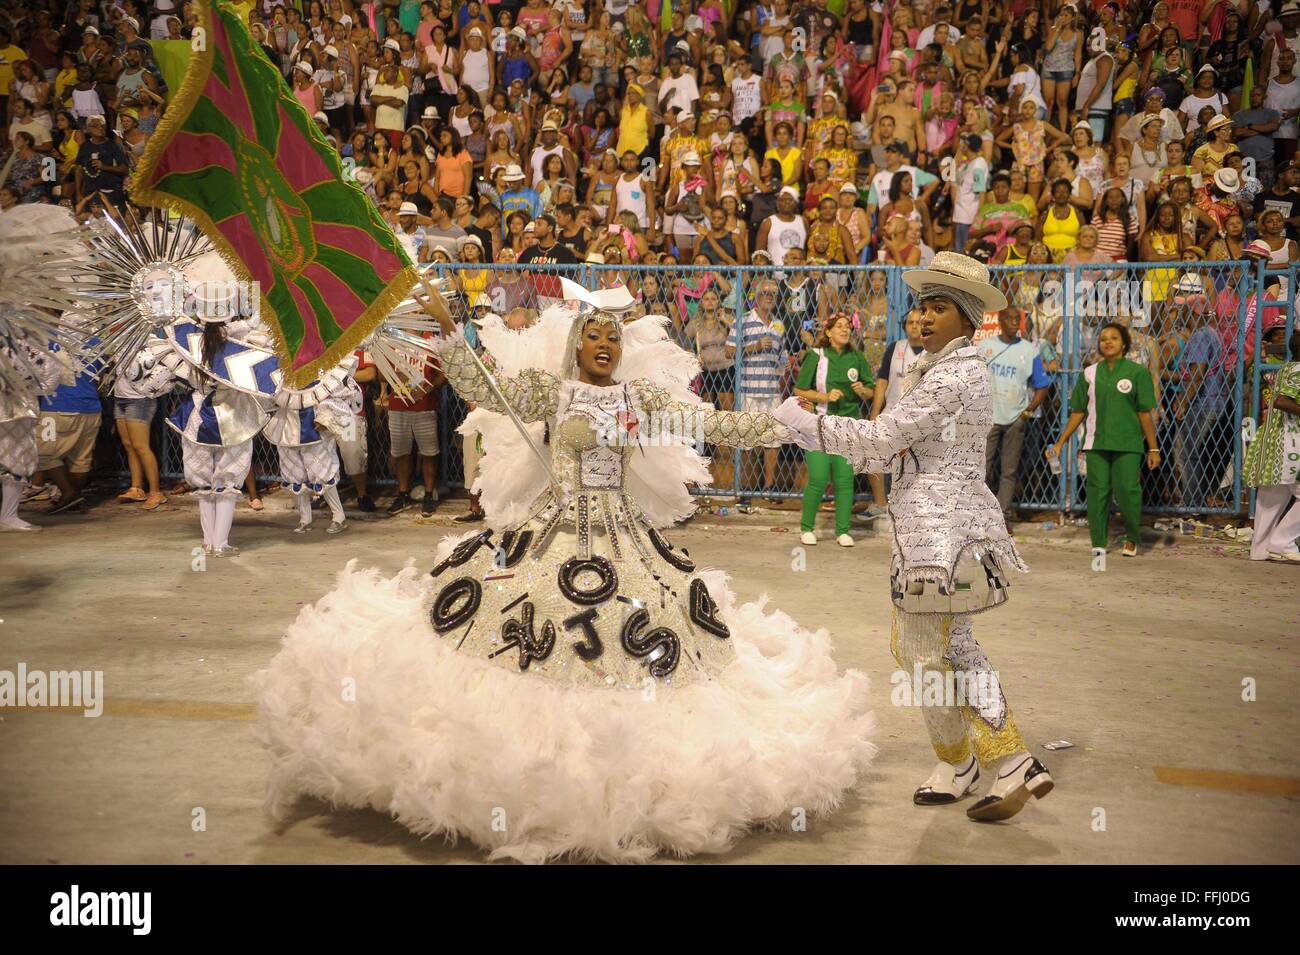 Samba Dancers Perform In The Sambadrome During The Parade Of Champions Following Rio Carnival